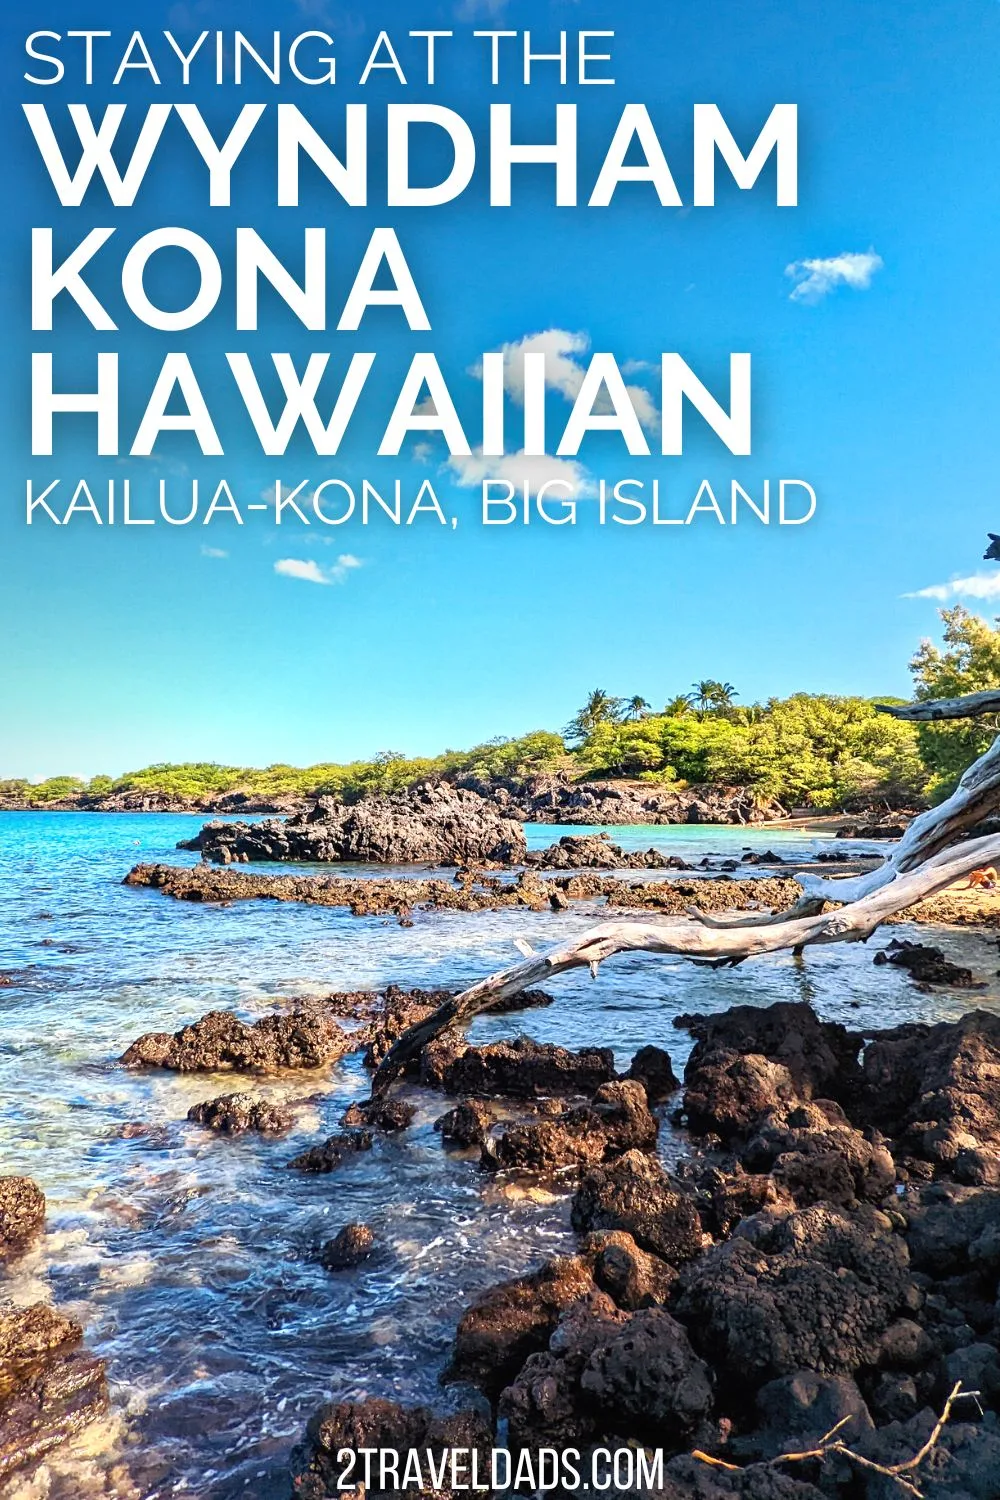 The Club Wyndham Kona Hawaiian is a condo resort located in Kailua-Kona on the Kona Coast of the Big Island. Complete review of accommodations, location and things to do in Kona. AND, is it a timeshare?